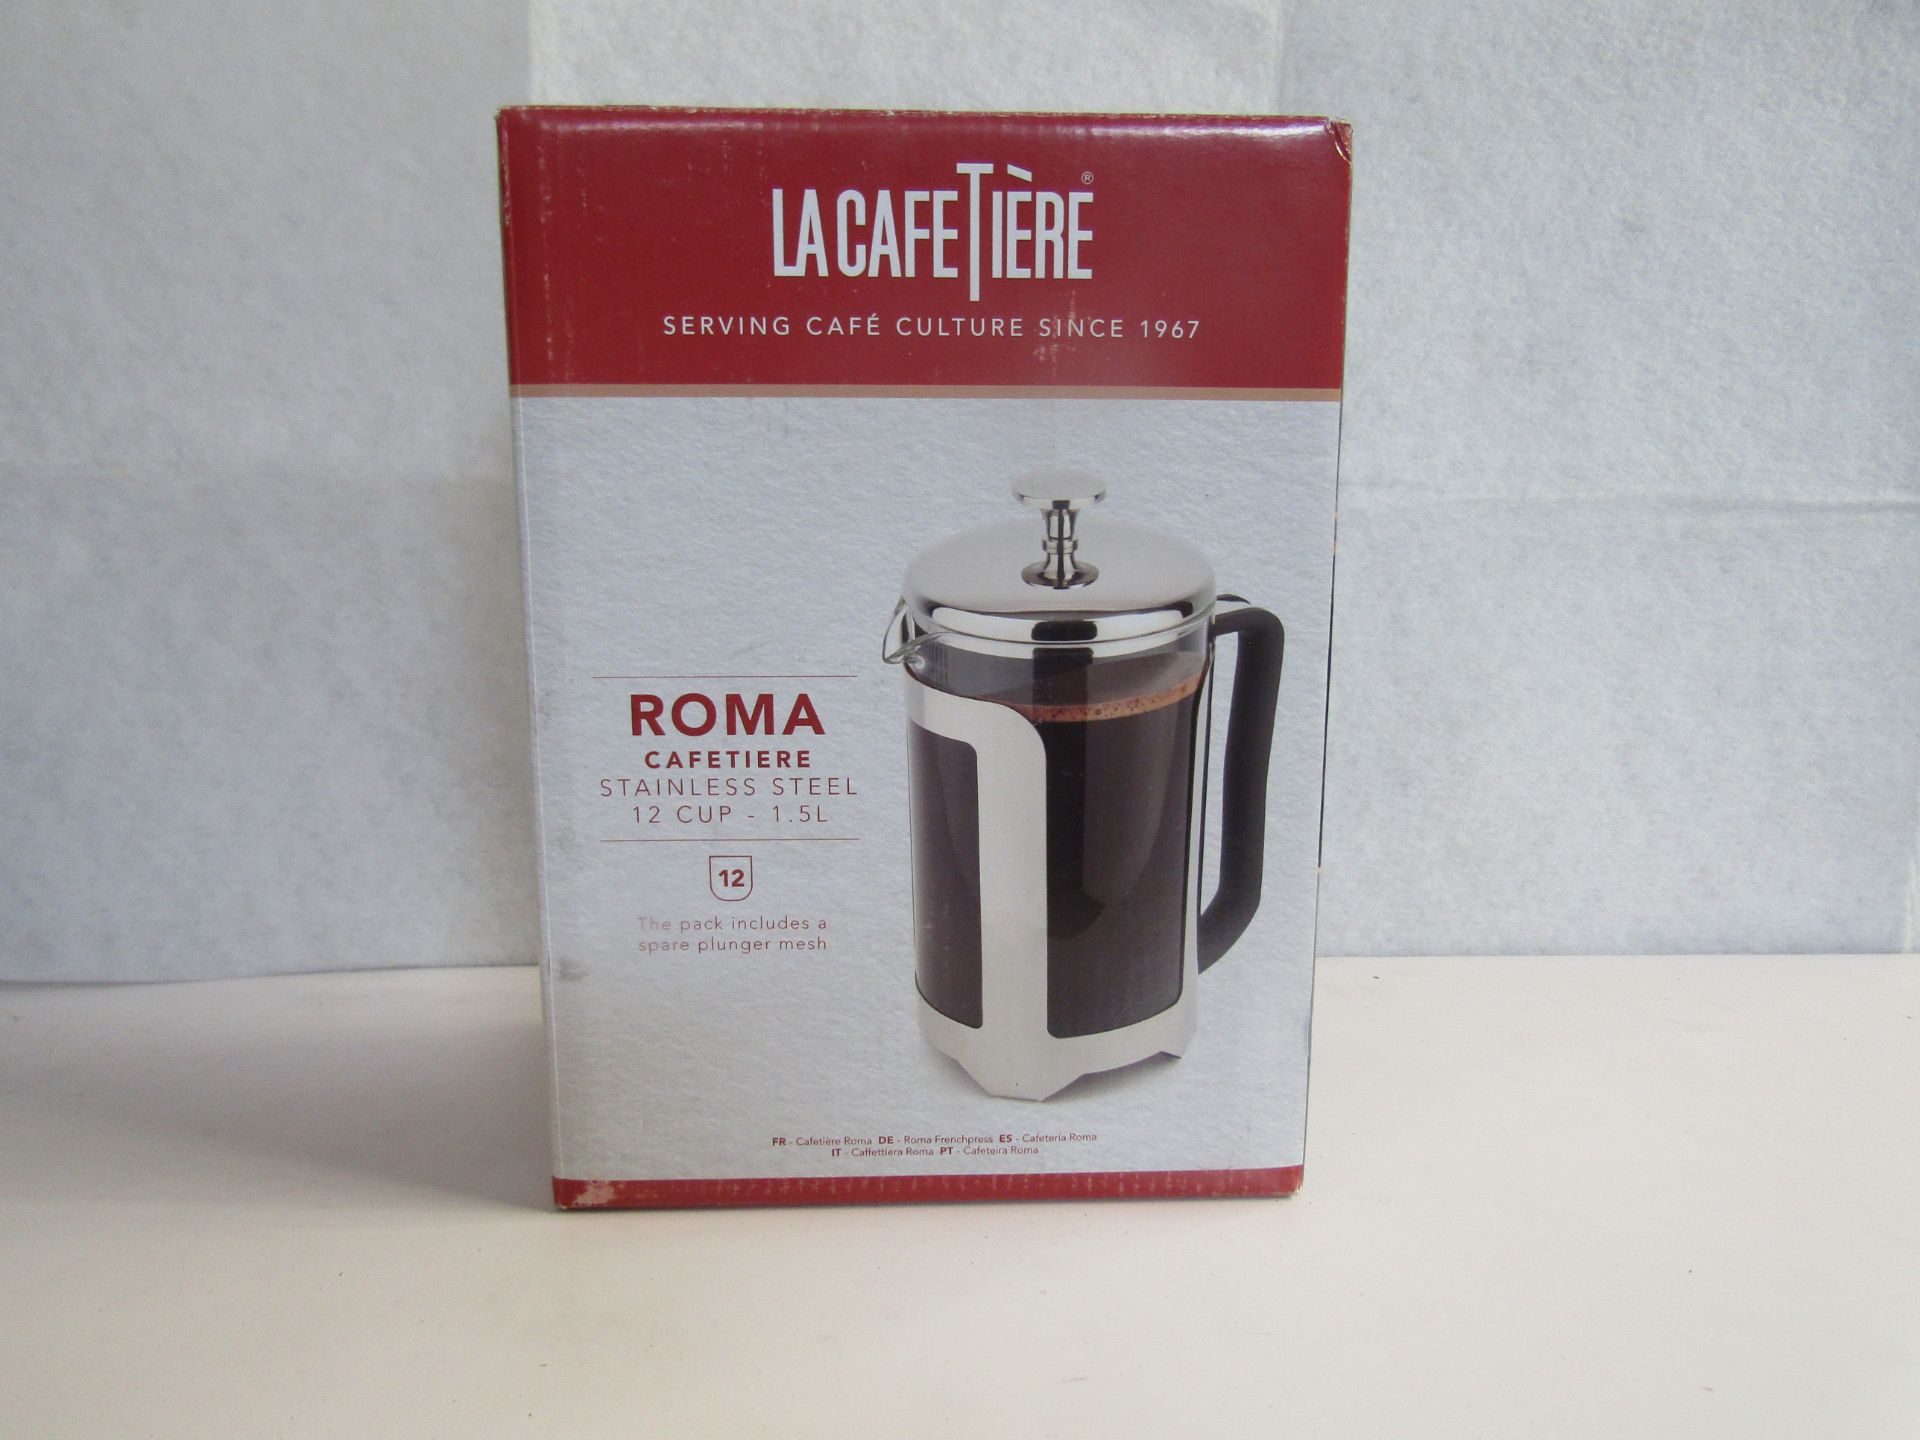 La Cafetiere - Roma Stainless Steel Cafetiere 1.5L - Boxed.